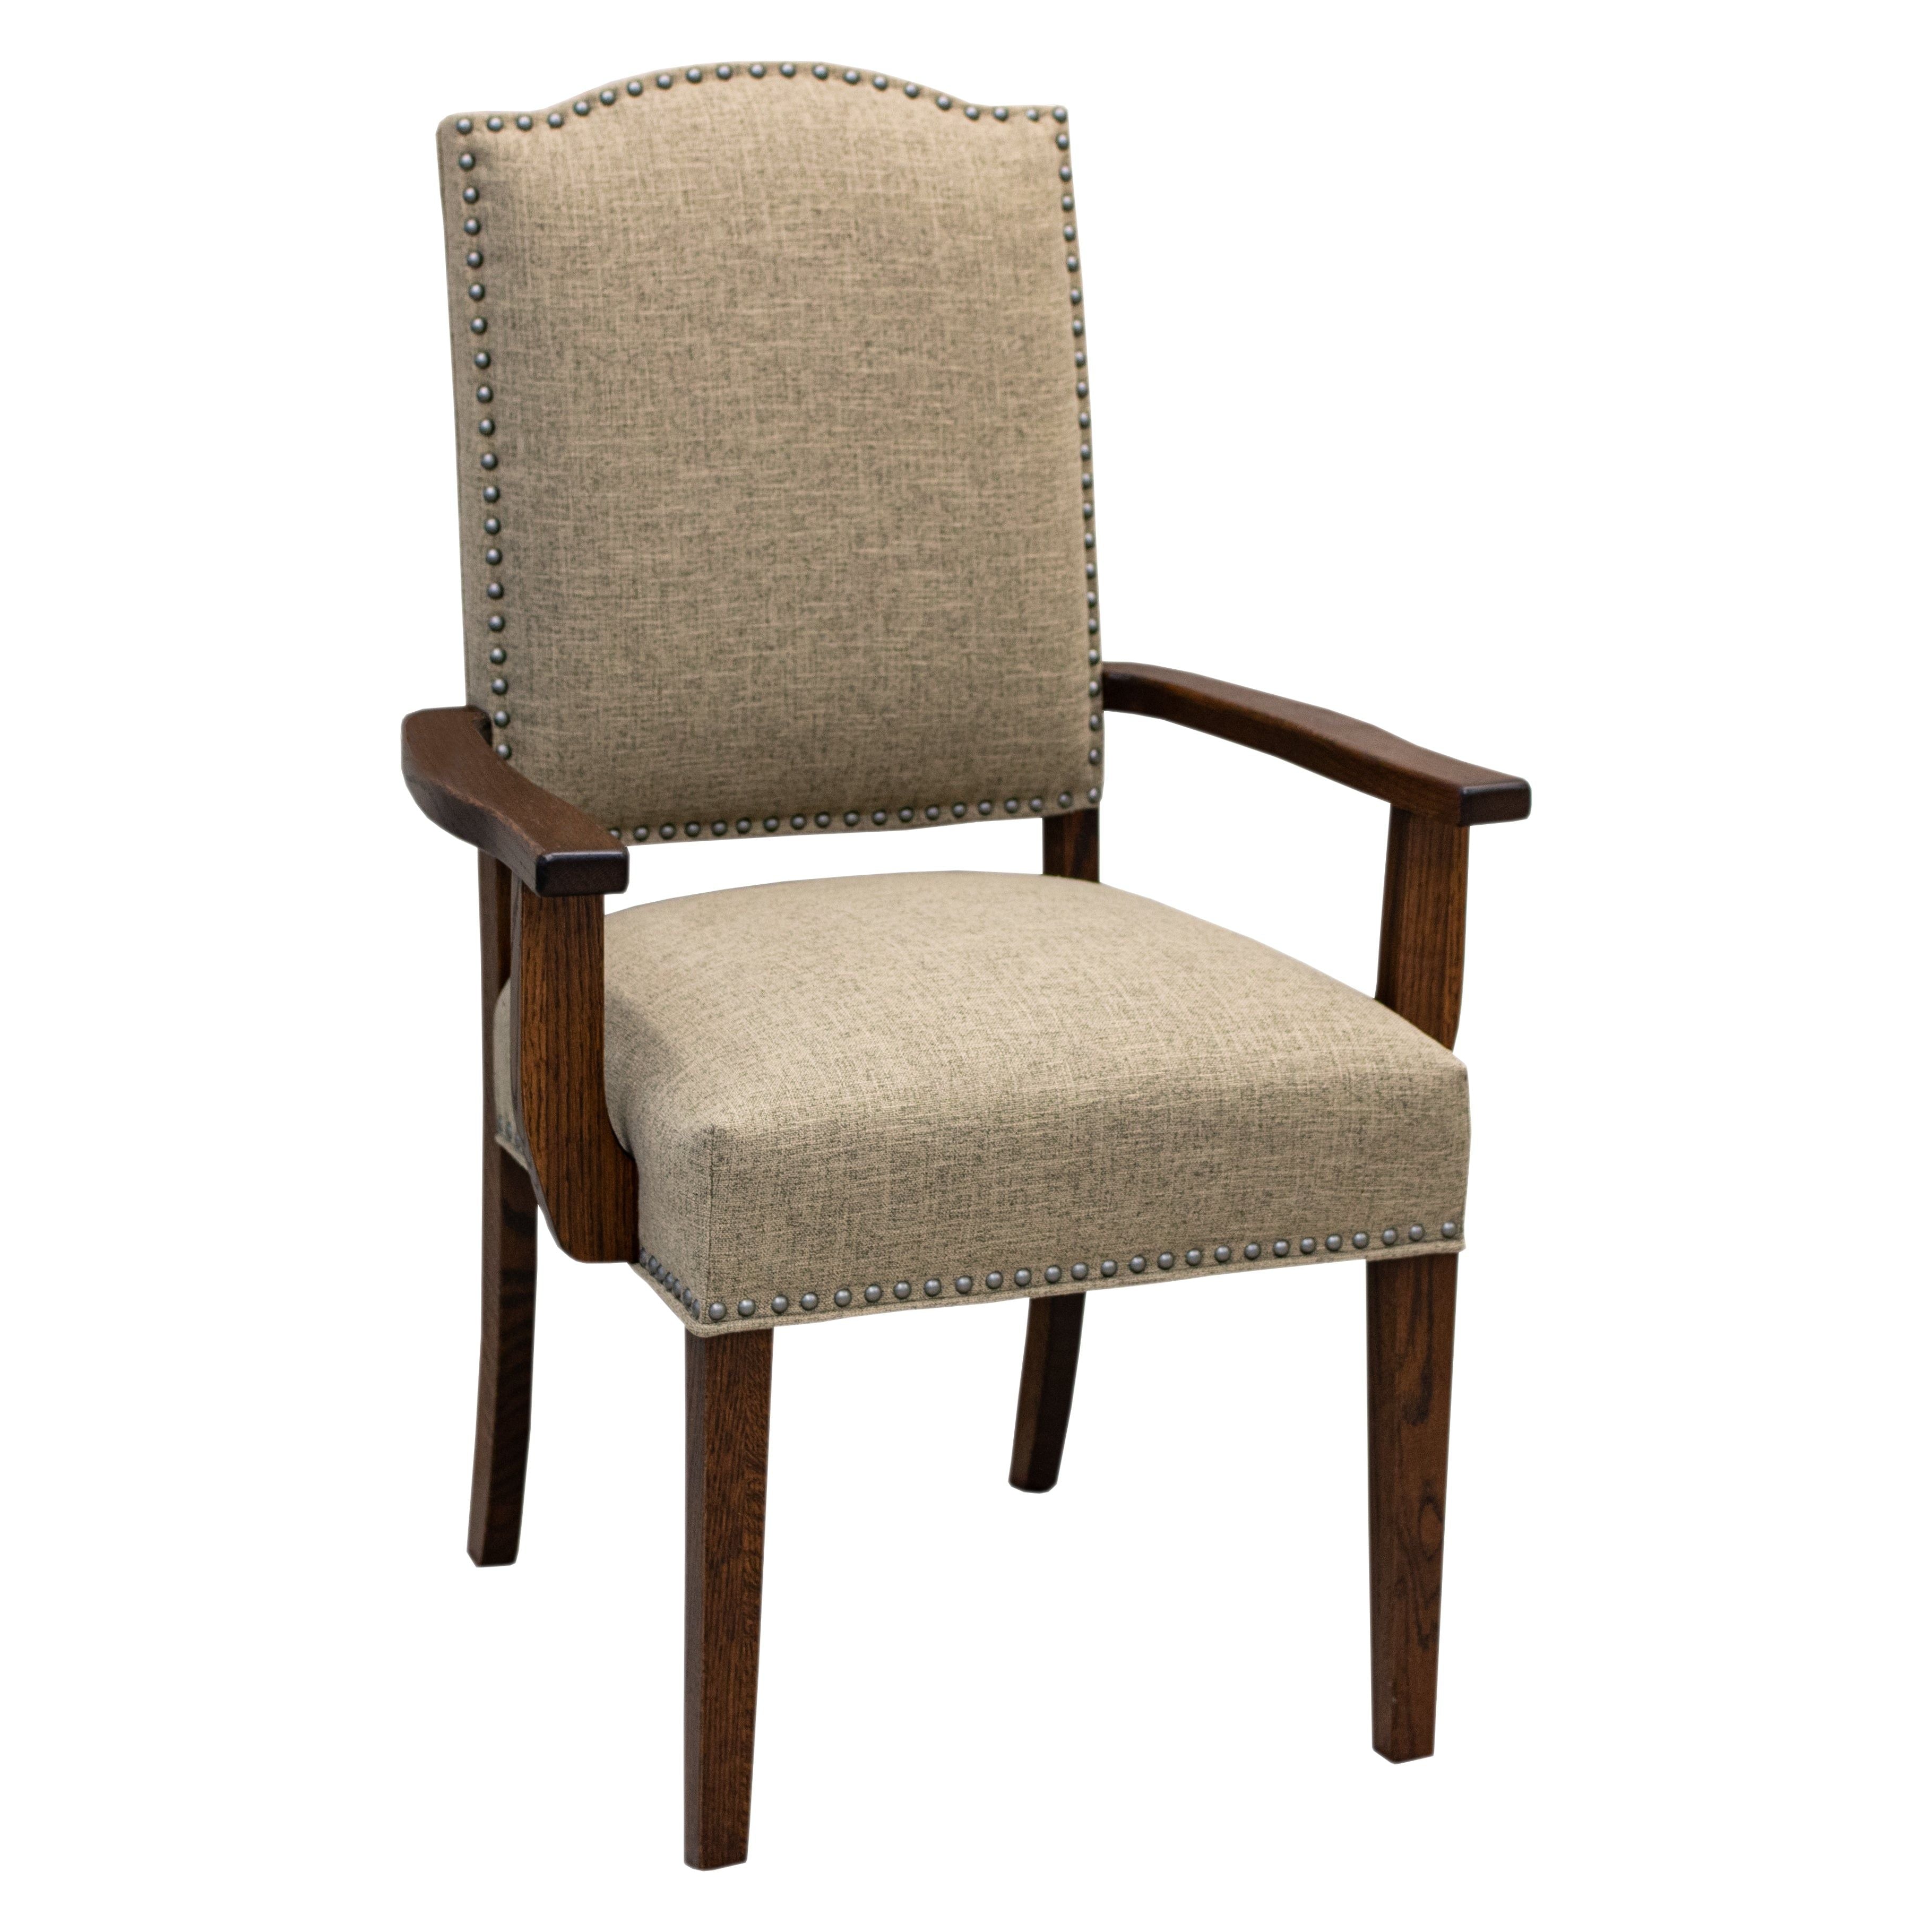 Emerson Upholstered Dining Chair with Wood Arms